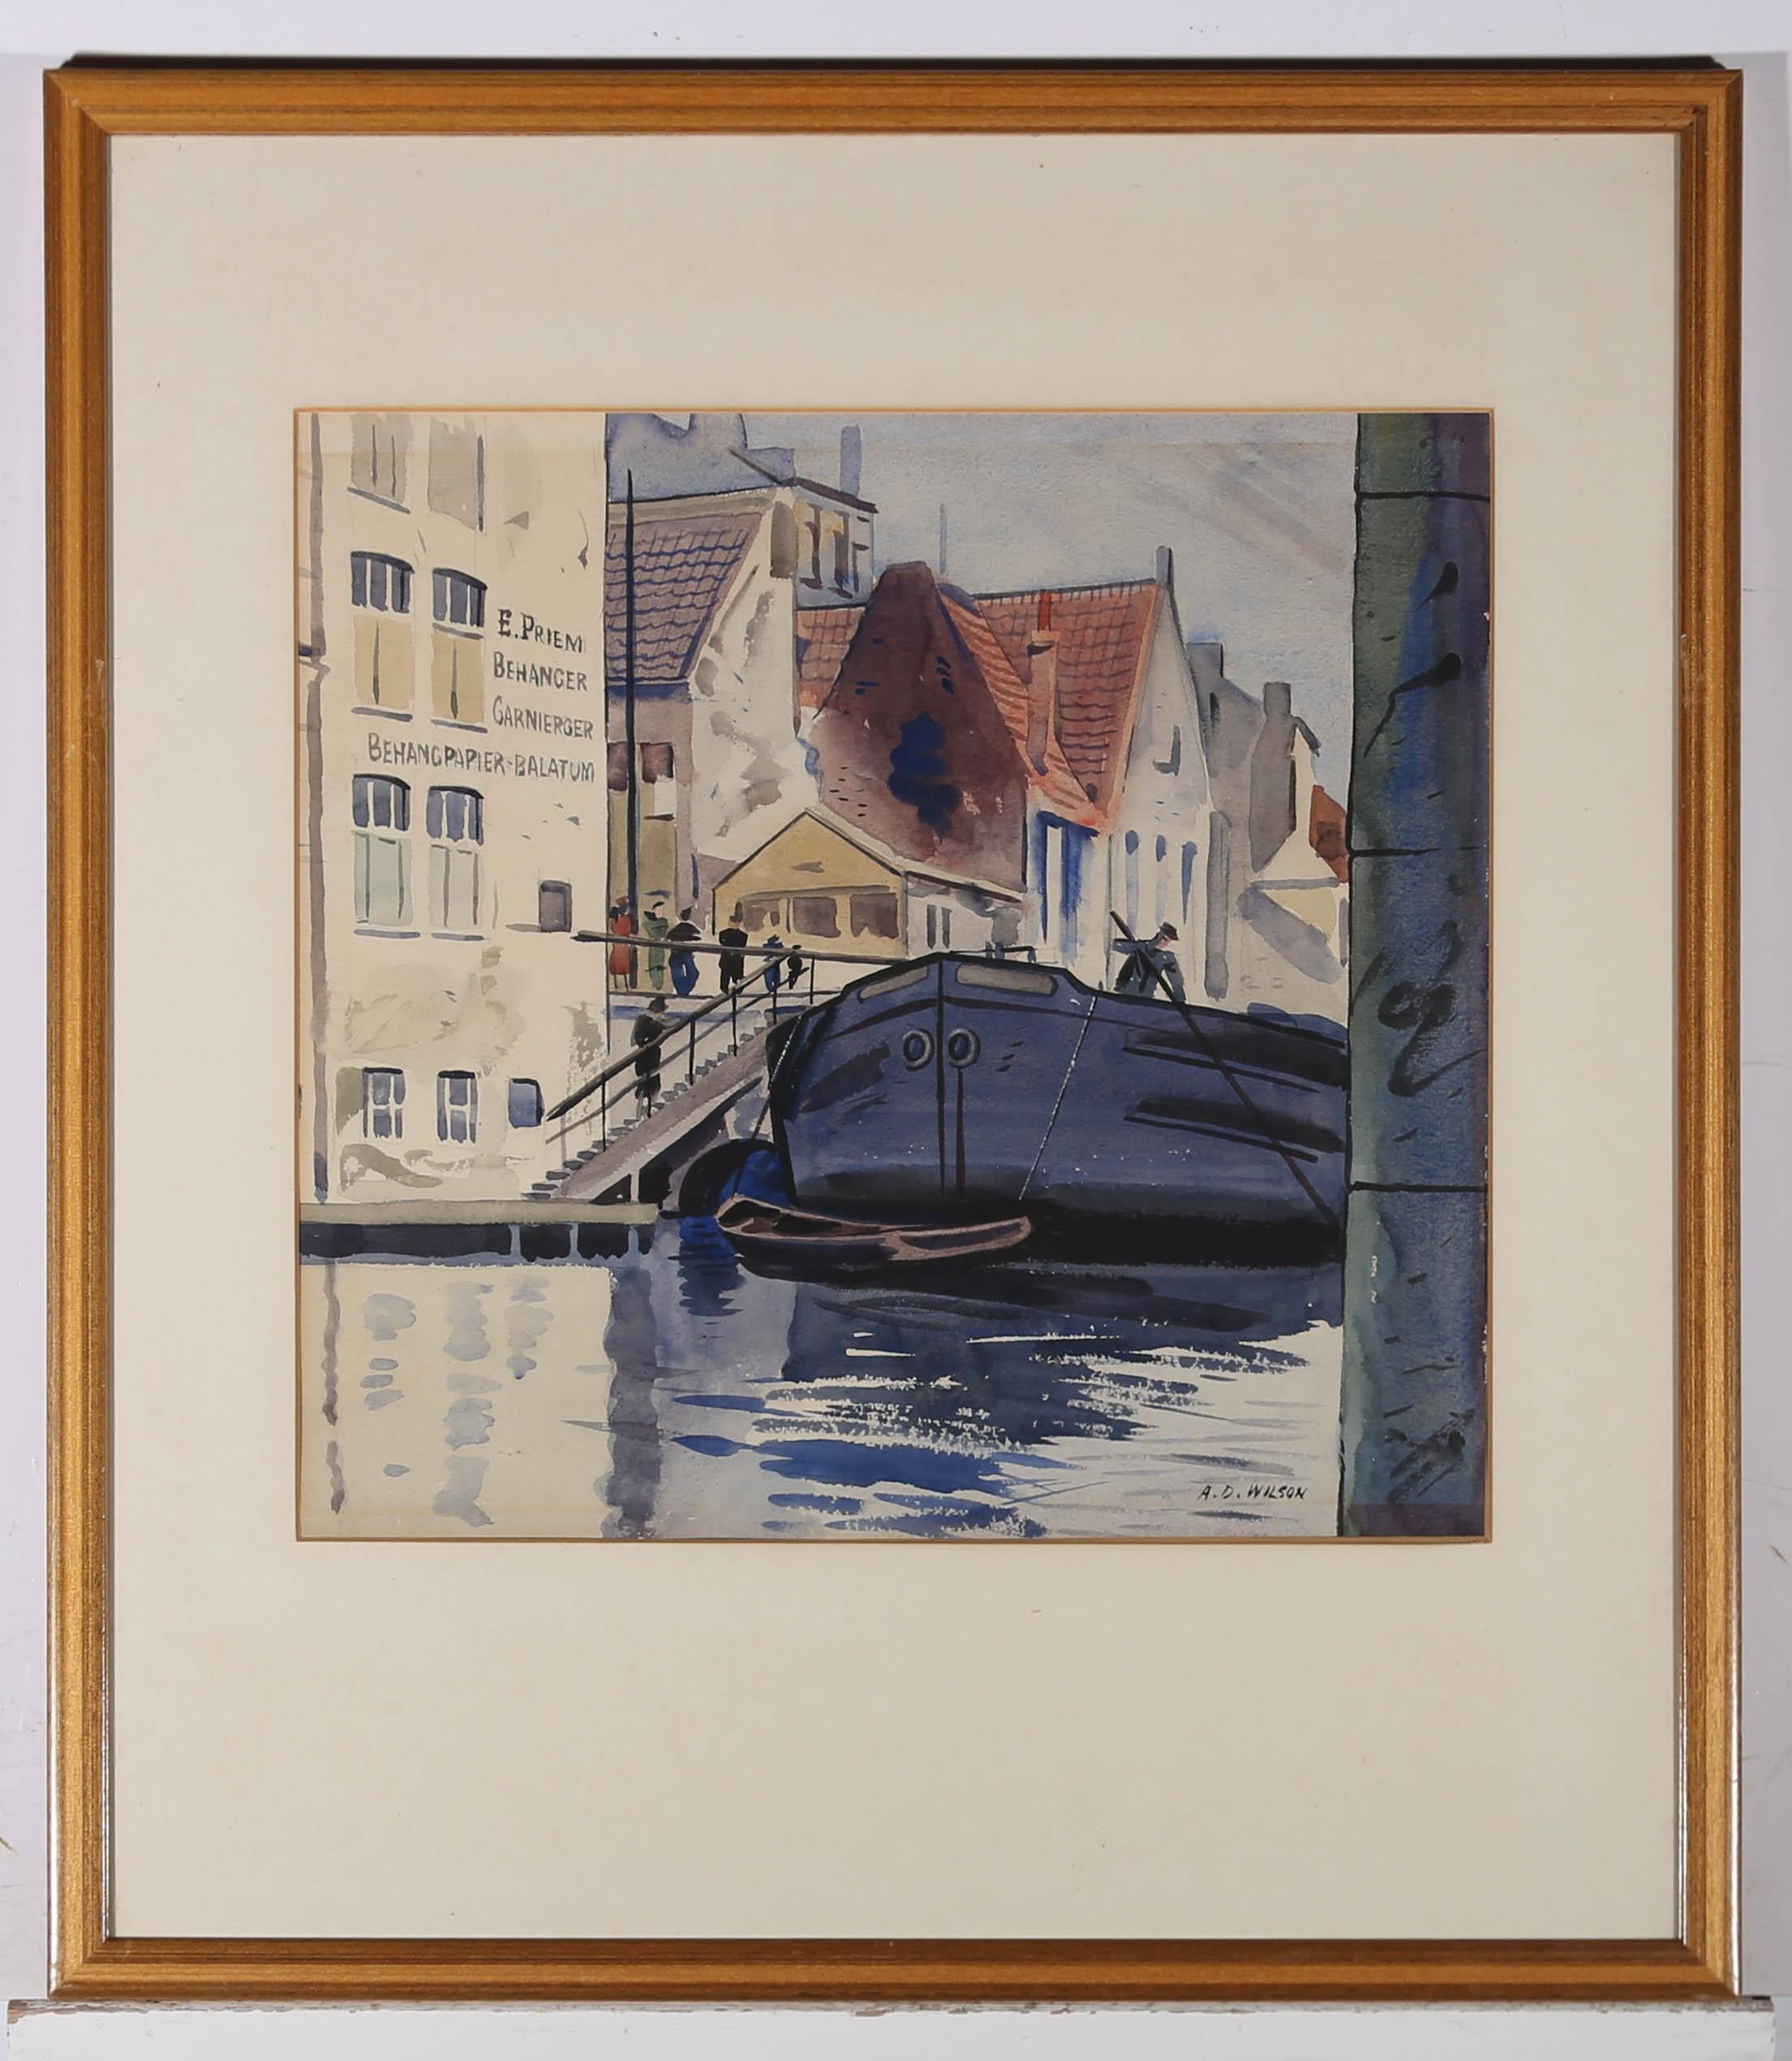 A bold, impressionistic watercolour by Canadian artist Alan Dent Wilson, depicting a large barge making is way down a canal. Signed to the lower right. Presented in a glazed, pine frame with card mount. On watercolour paper.






















